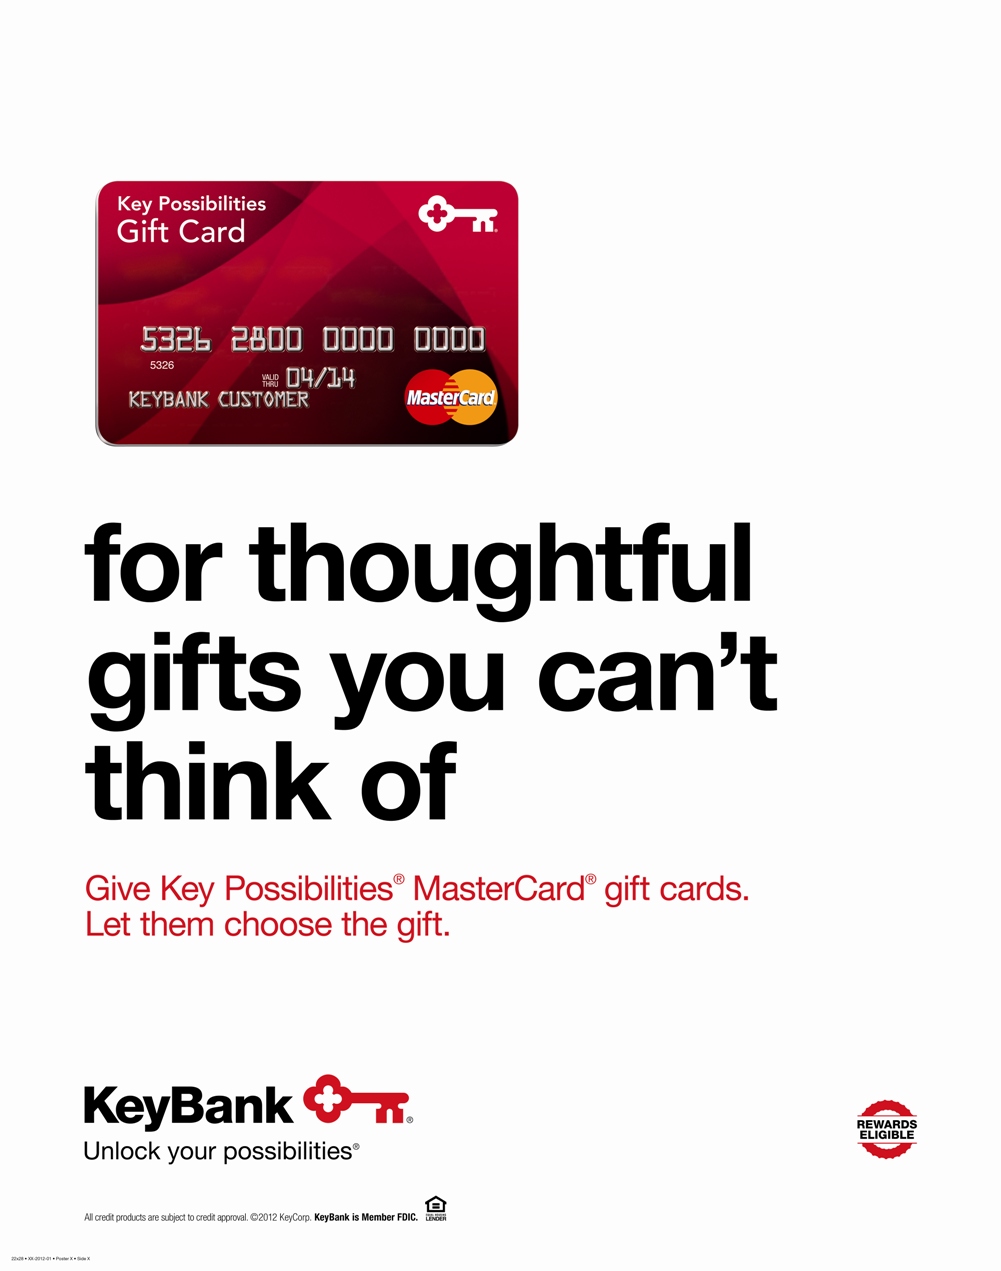 Keybank Concepts